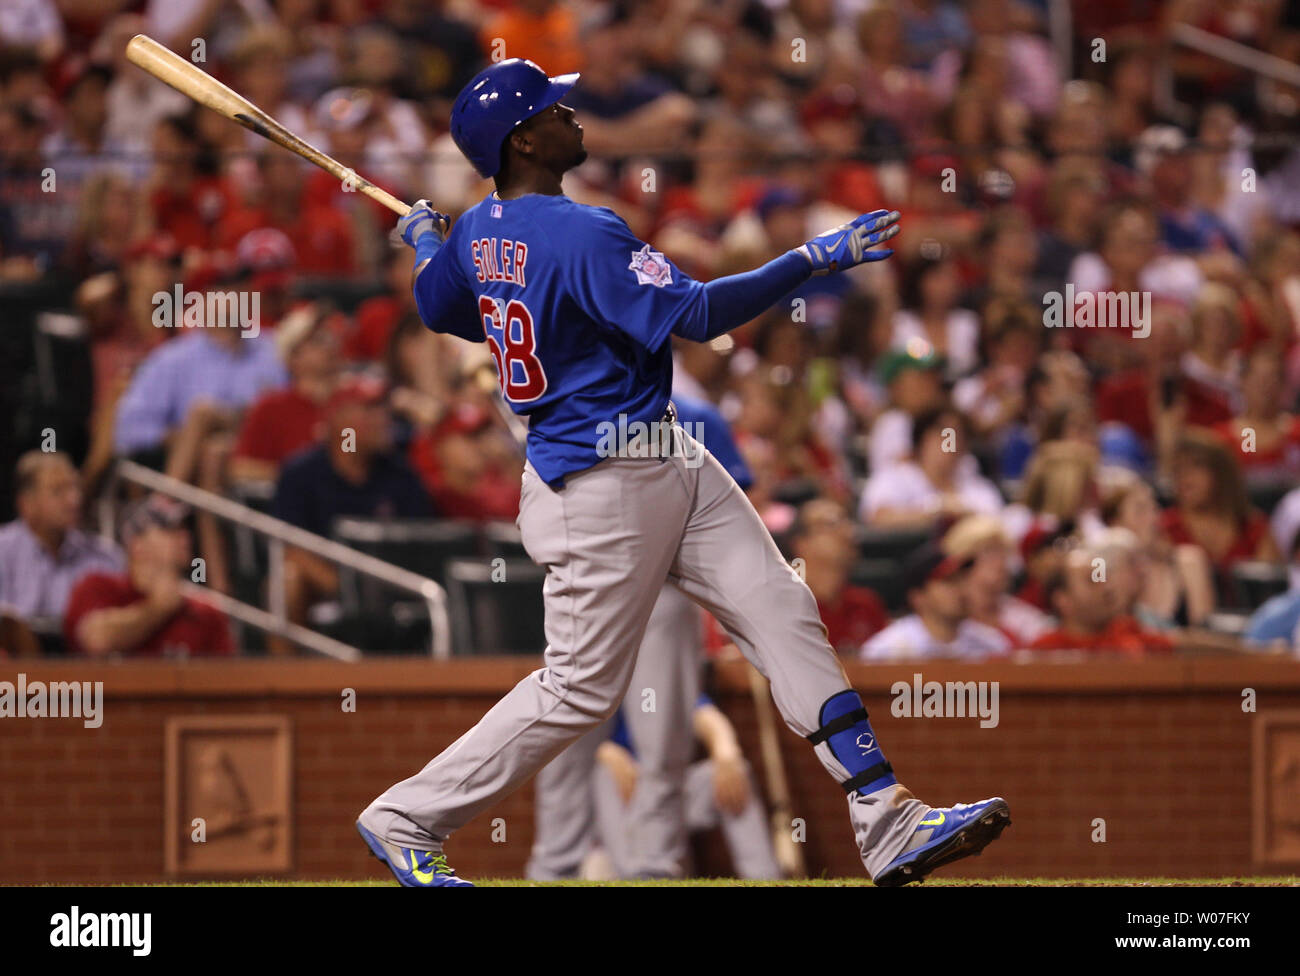 Chicago Cubs Jorge Soler swings, hitting a two run home run in the eighth  inning against the St. Louis Cardinals at Busch Stadium in St. Louis on  August 29, 2014. UPI/Bill Greenblatt